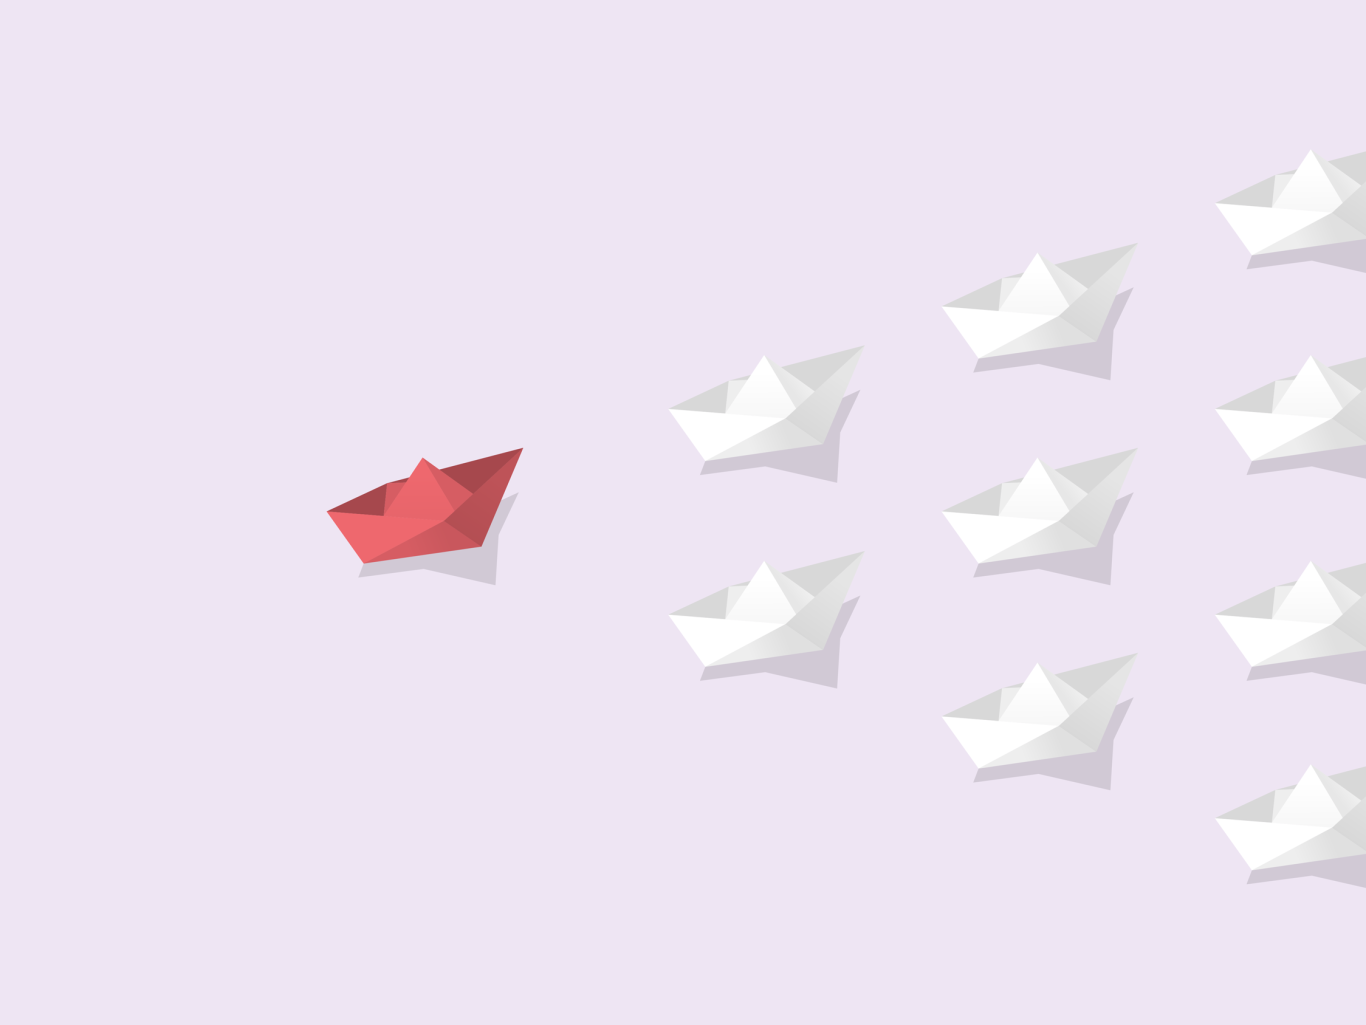 A collection of paper boats in a pattern with a single red one at the front showing navigation.